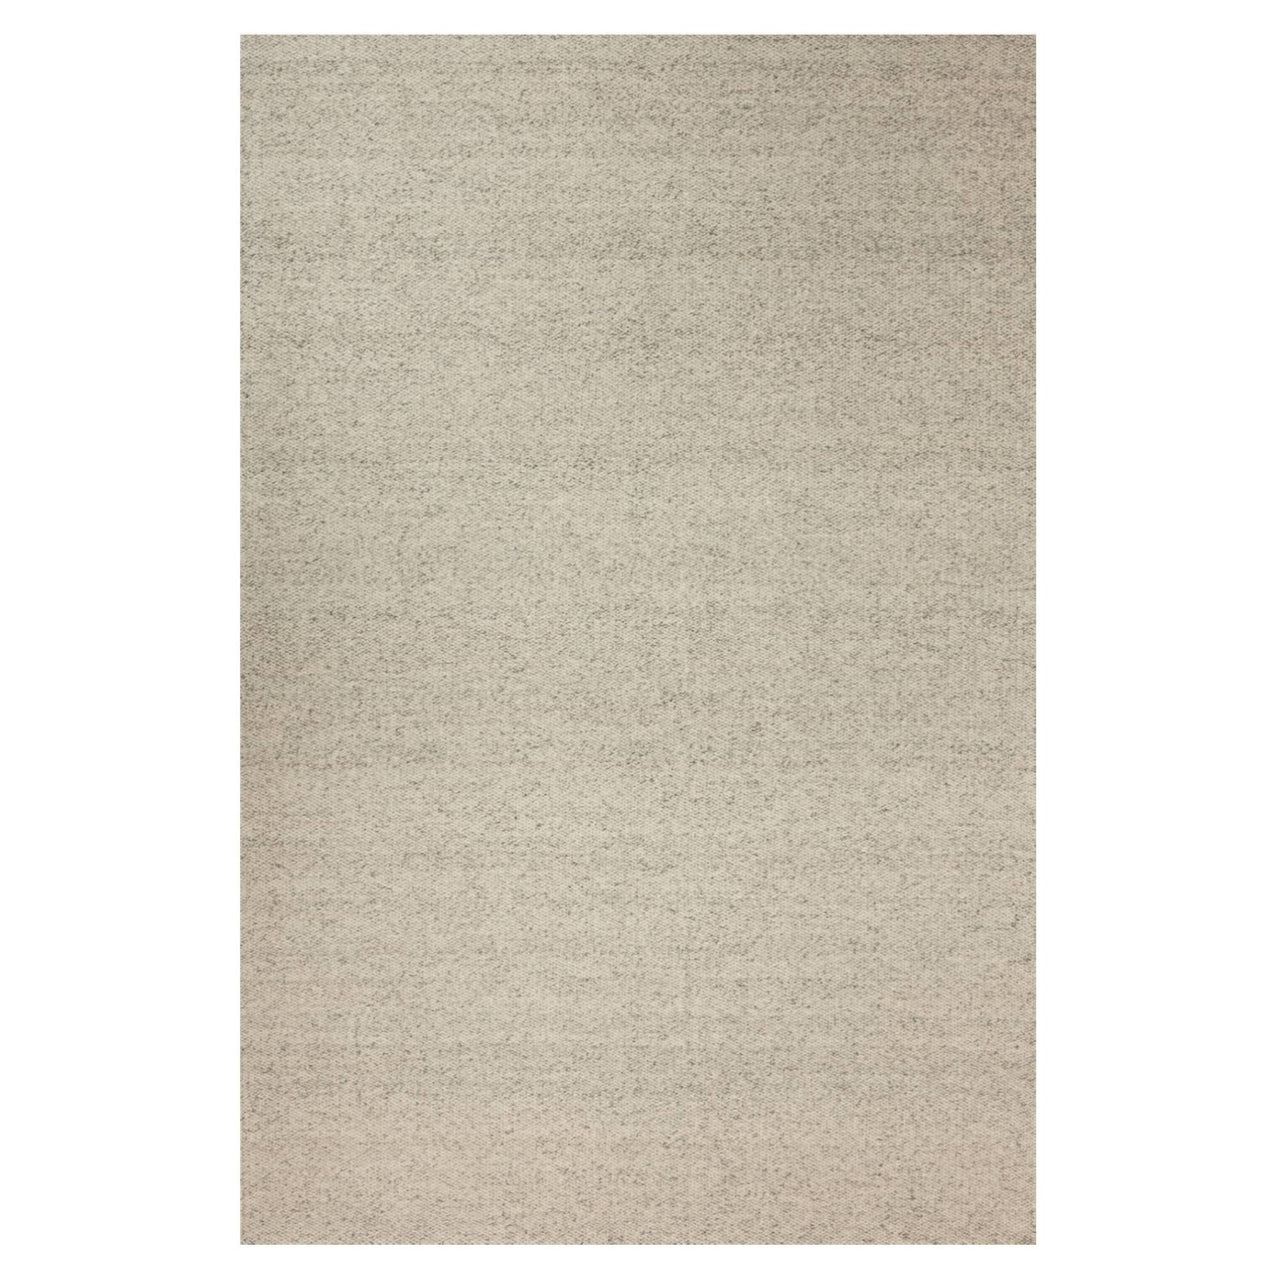 Twisted Wool Rug: Extra Large - 118.1